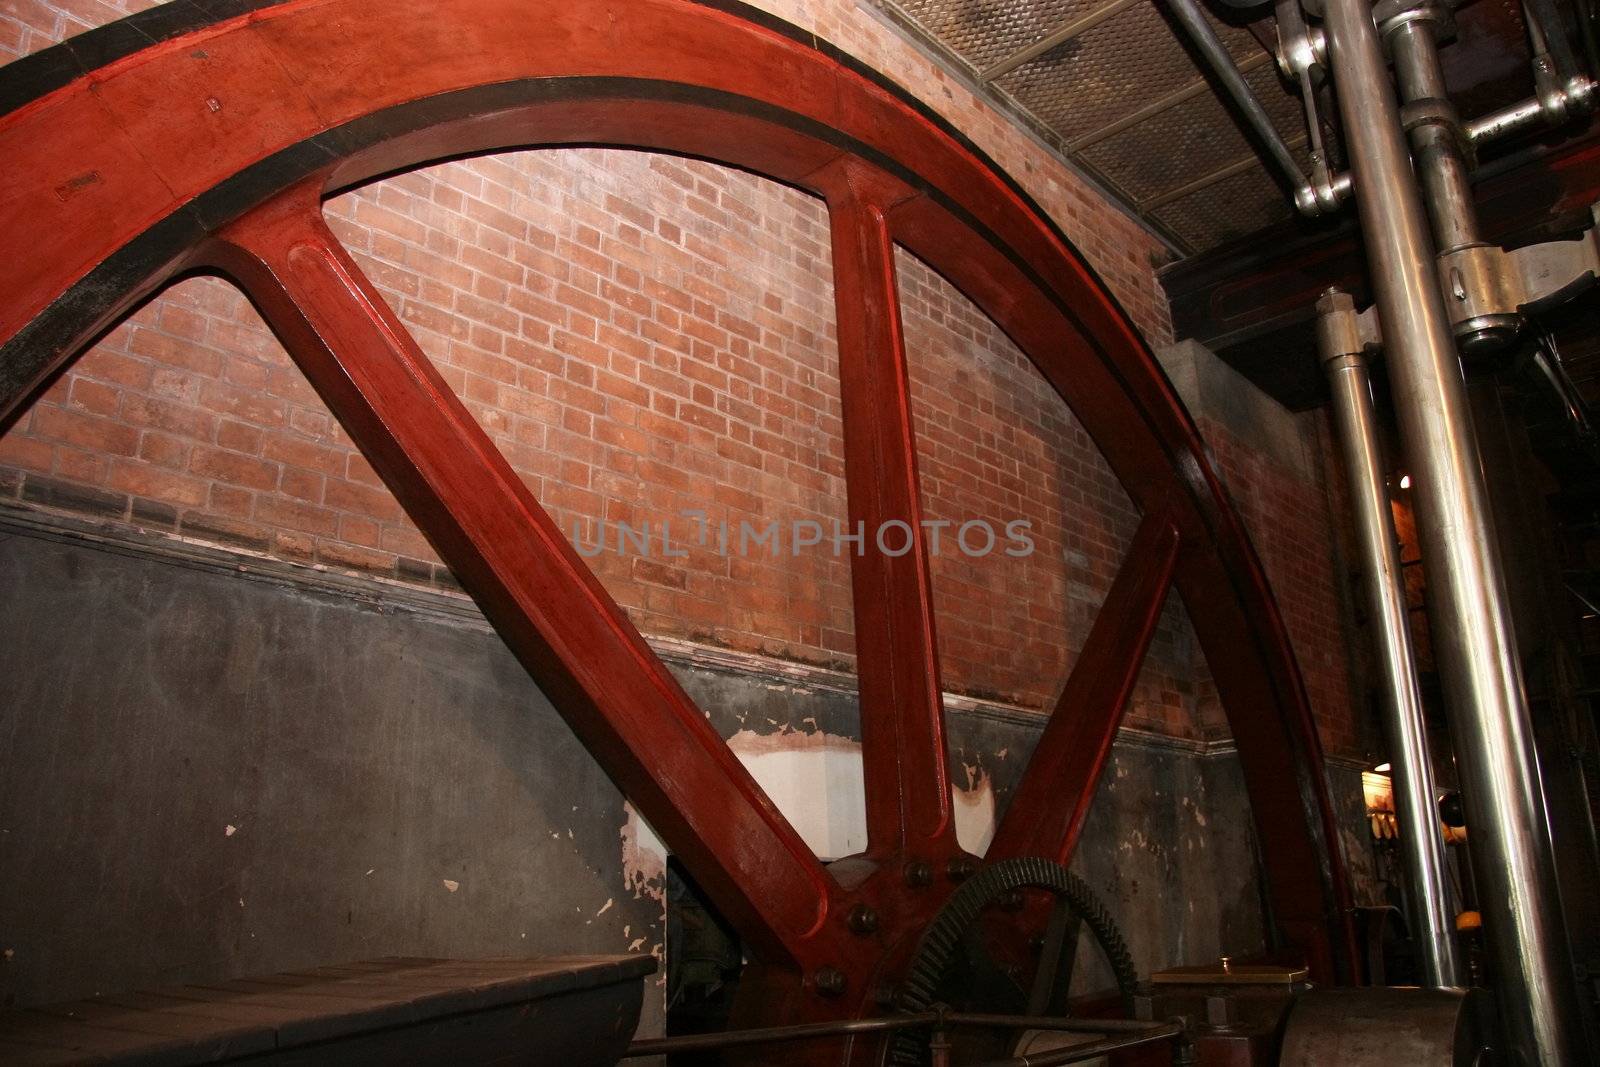 restored pump wheel driven by steam to move pump water for the water board